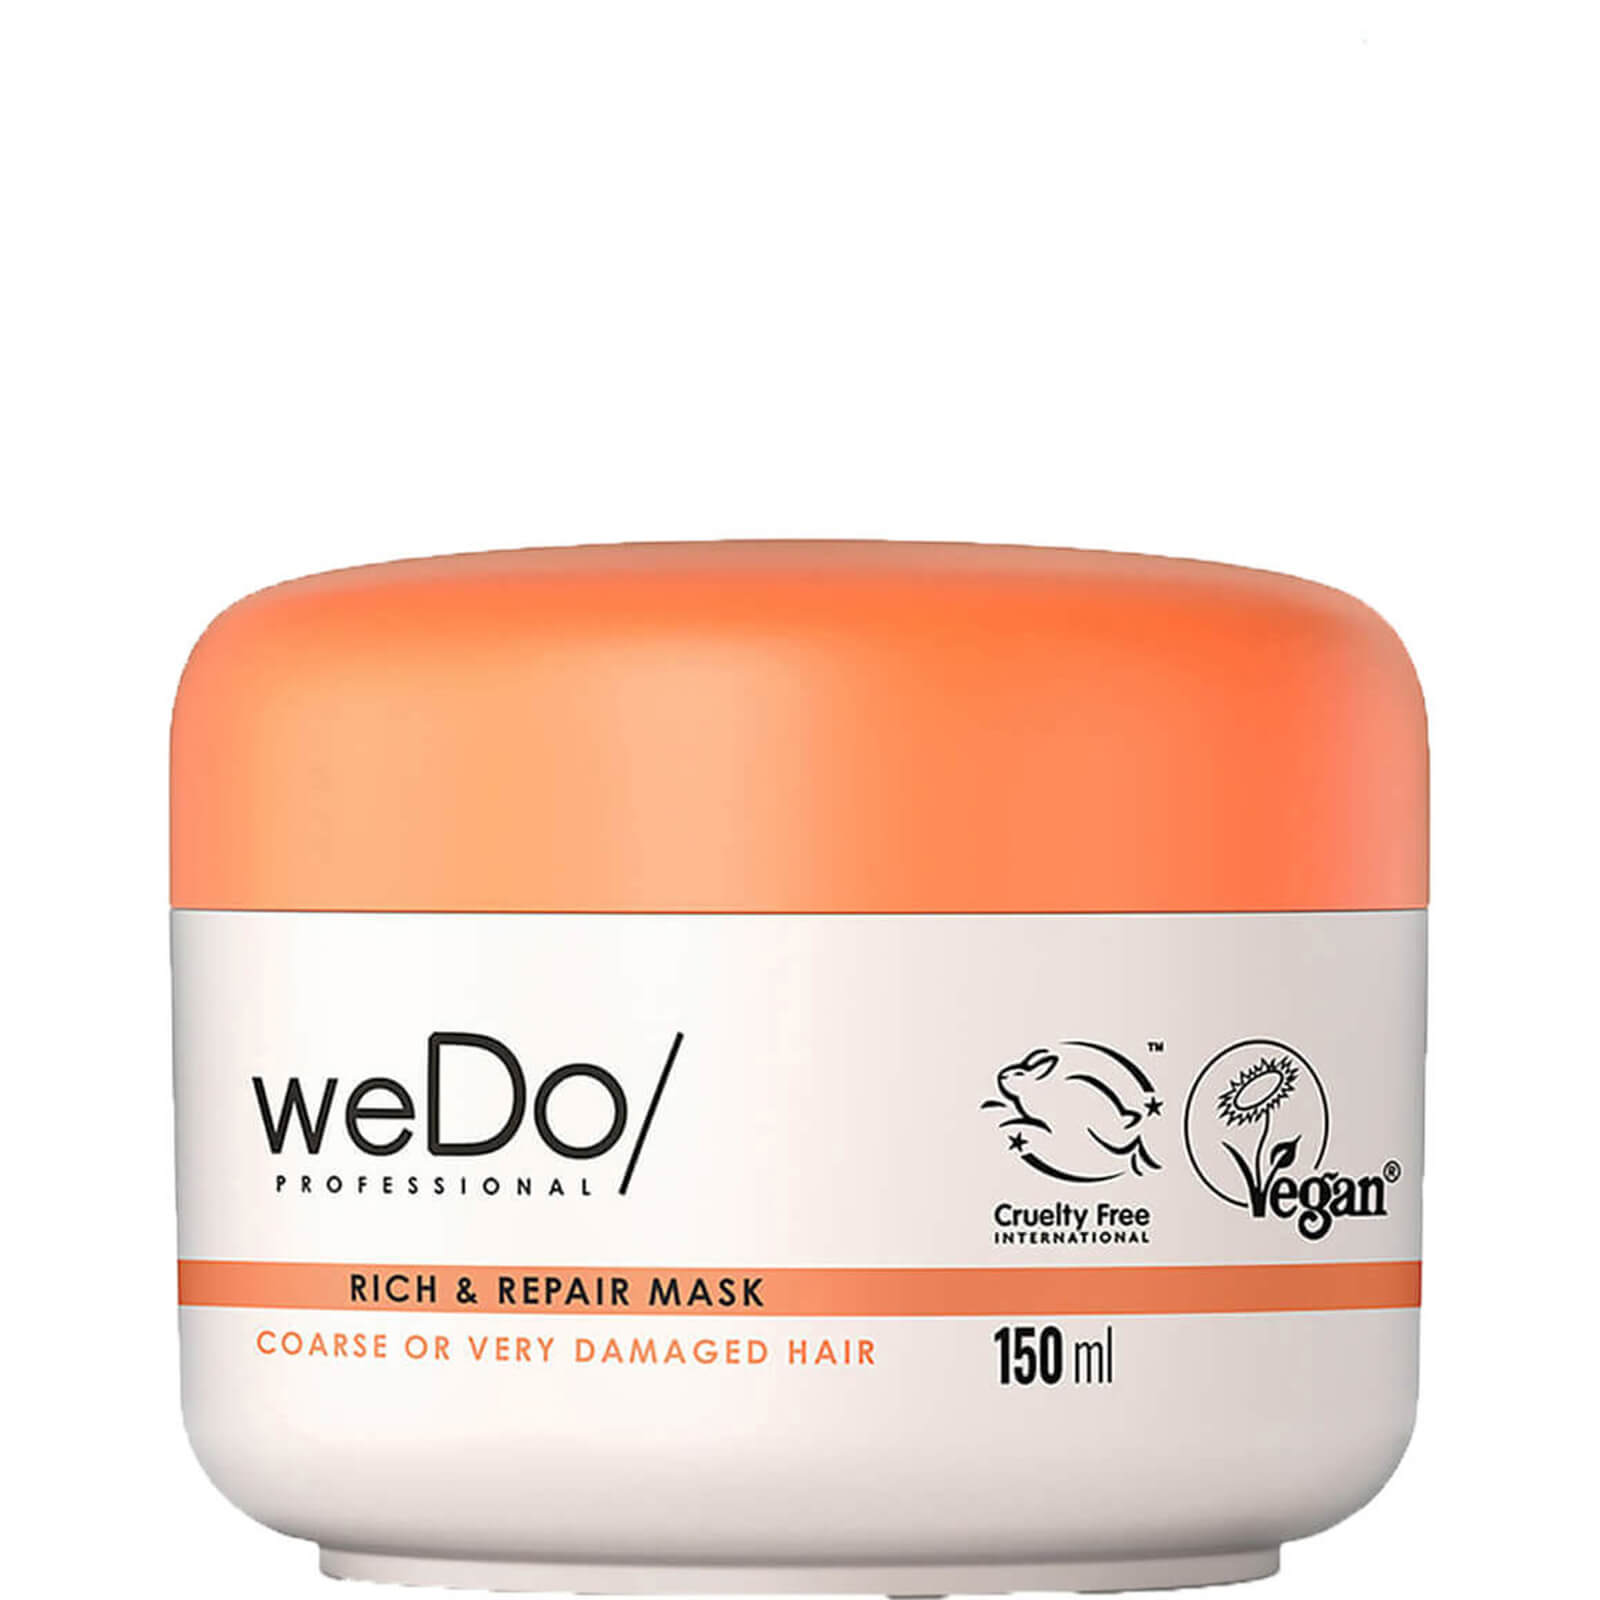 Image of weDo/ Professional Rich and Repair Mask 150ml